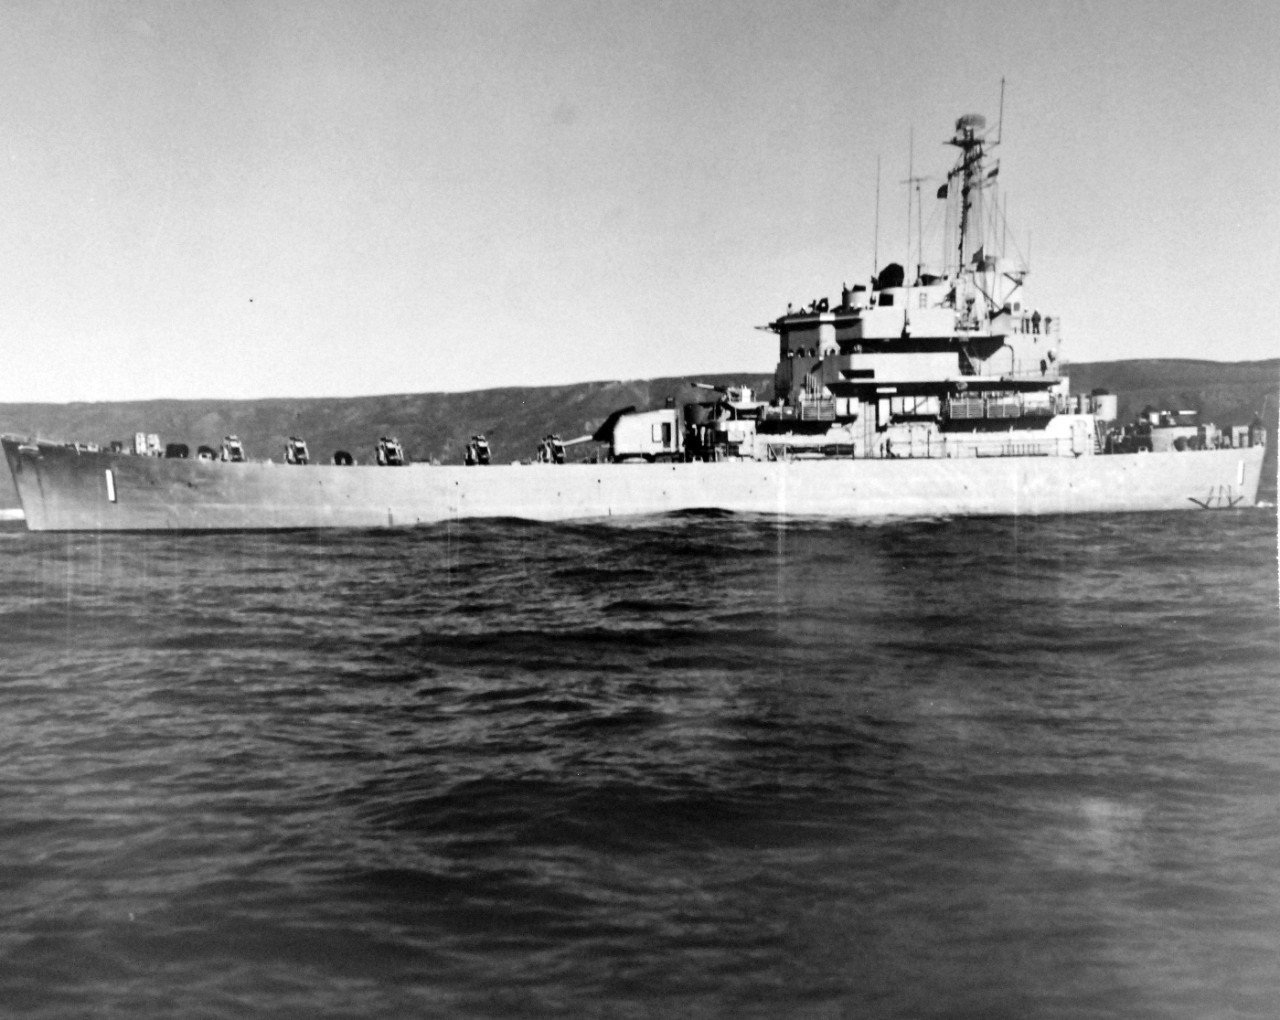 80-G-689754:  USS Carronade (IFS-1), 1955-59.   Carronade was an Inshore Fire Support Ship, built to provide gunfire support to amphibious landings or operations close to shore. Official U.S. Navy Photograph, now in the collections of the National Archives.  (2017/11/01).  Photograph is extremely curved.  